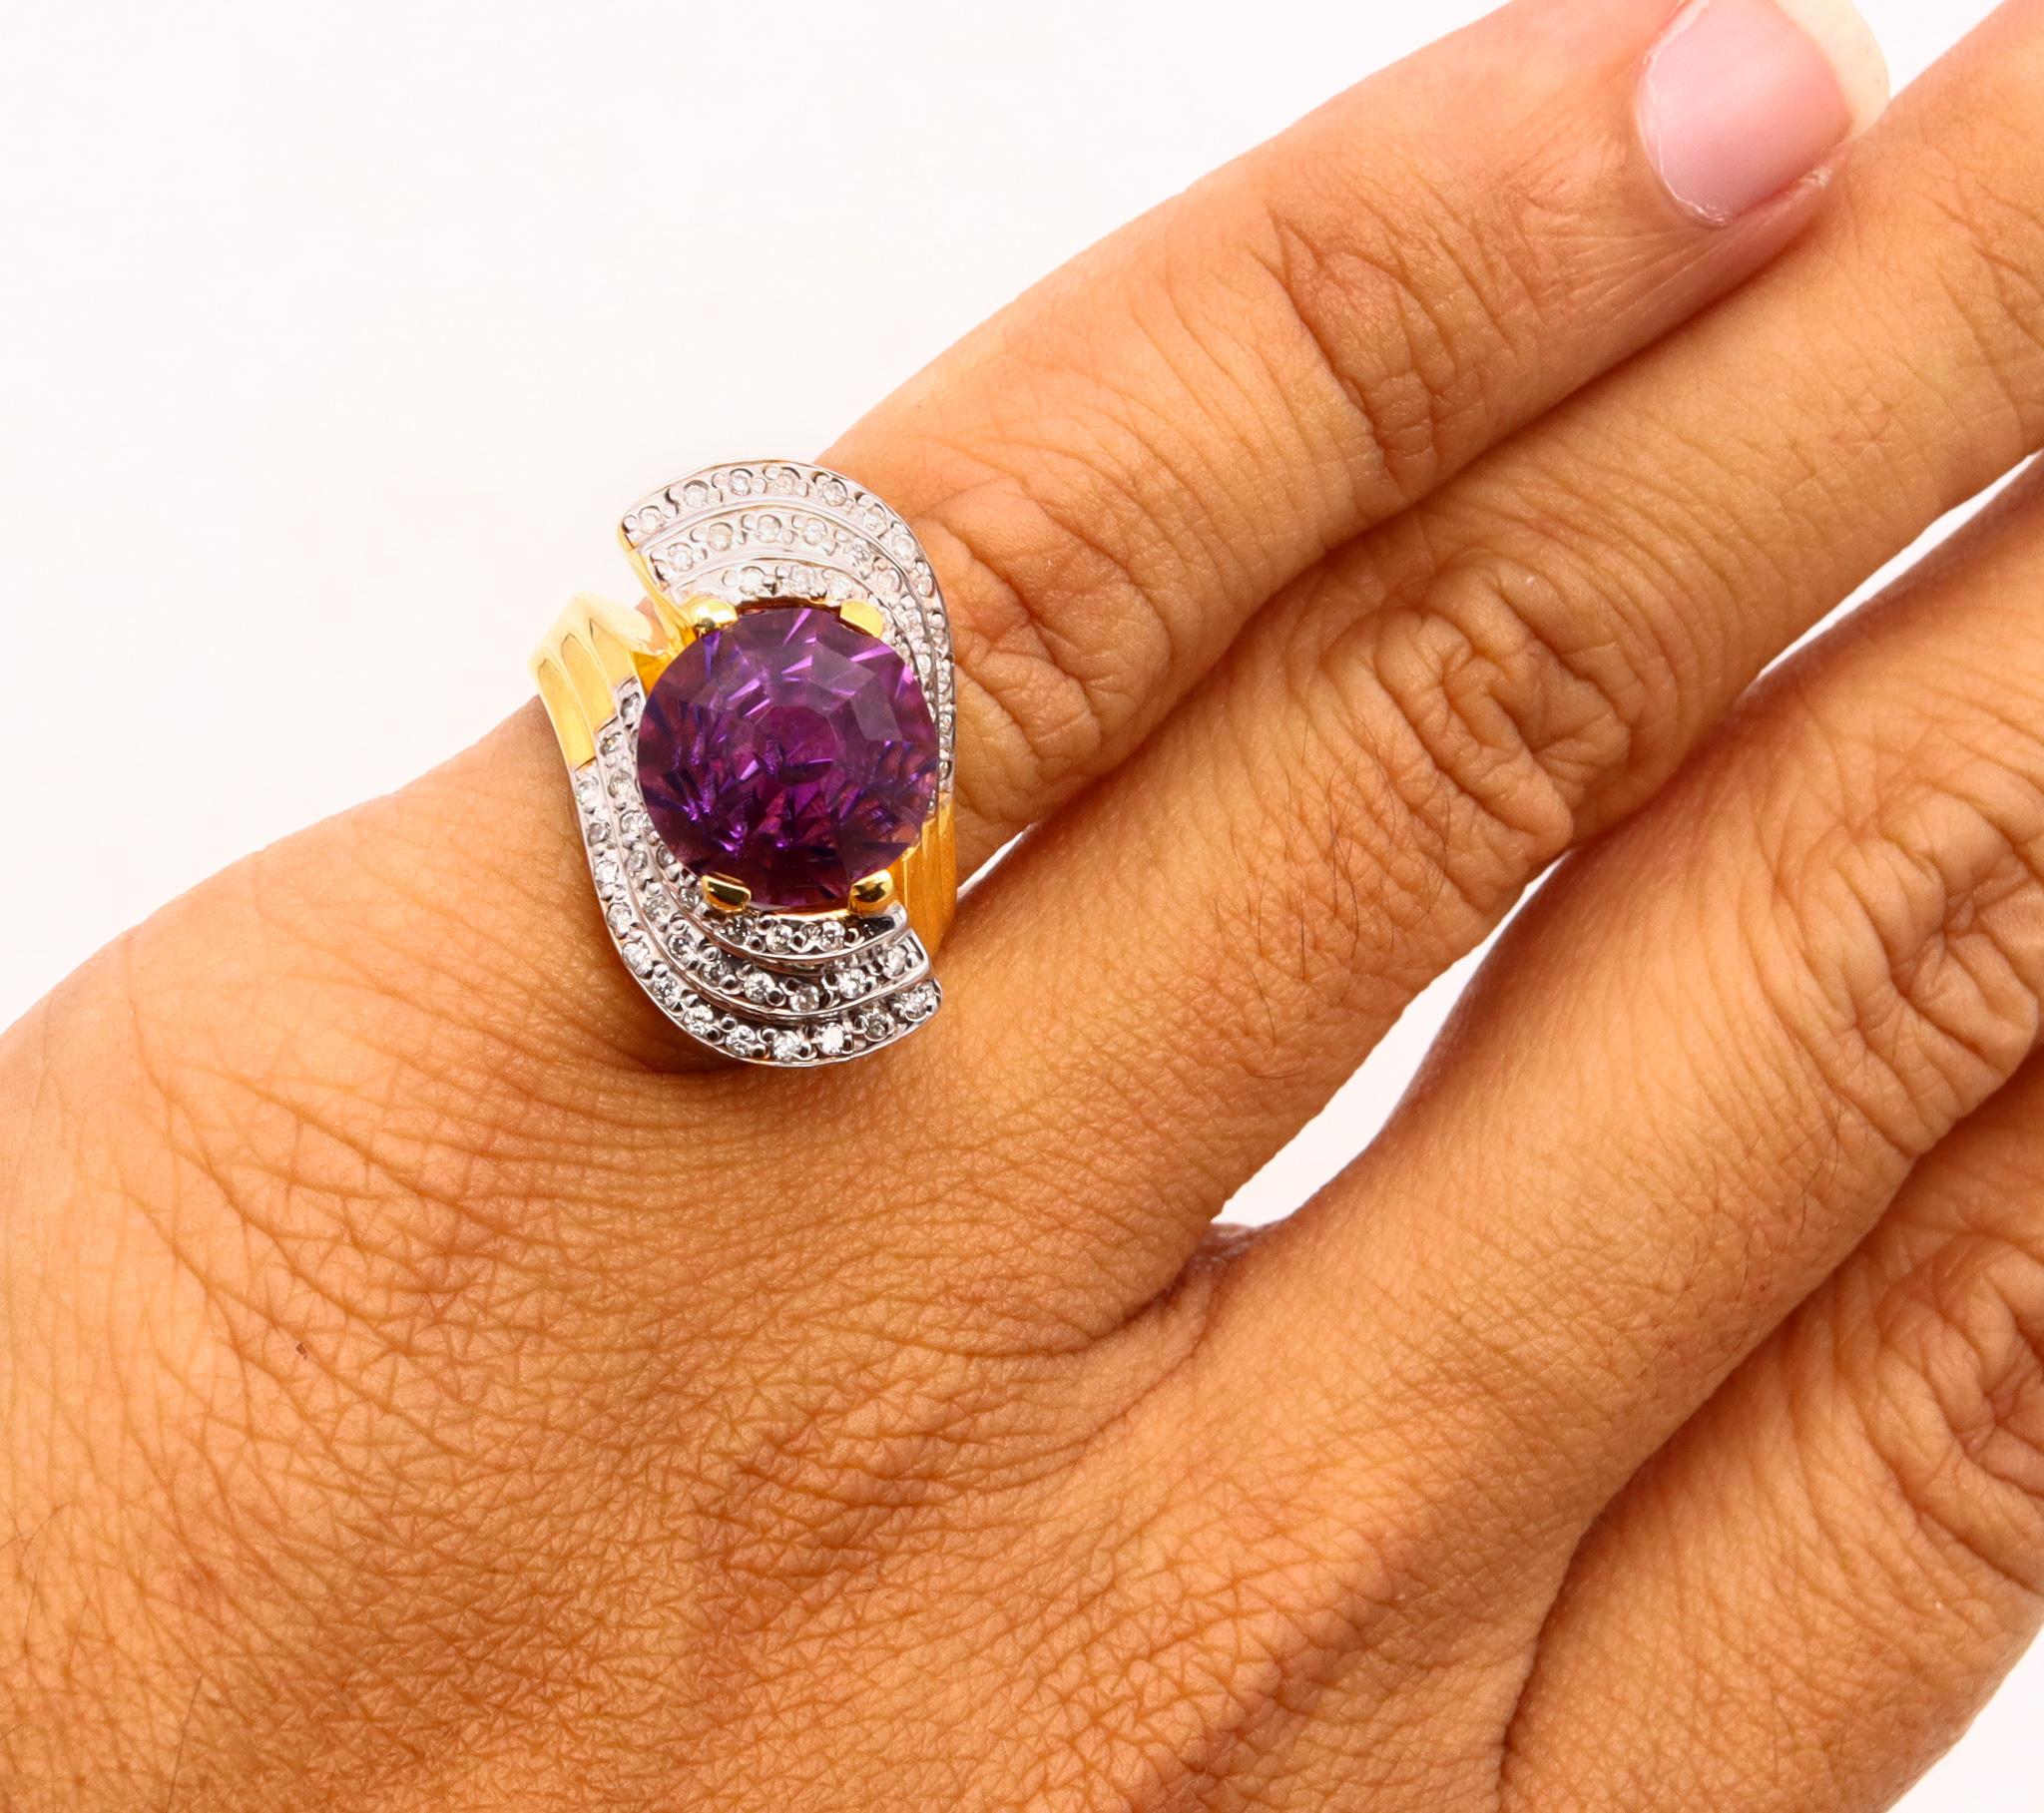 Women's Modernist Italian Bypass Cocktail Ring 18k Gold 7.31ctw Amethyst and Diamonds